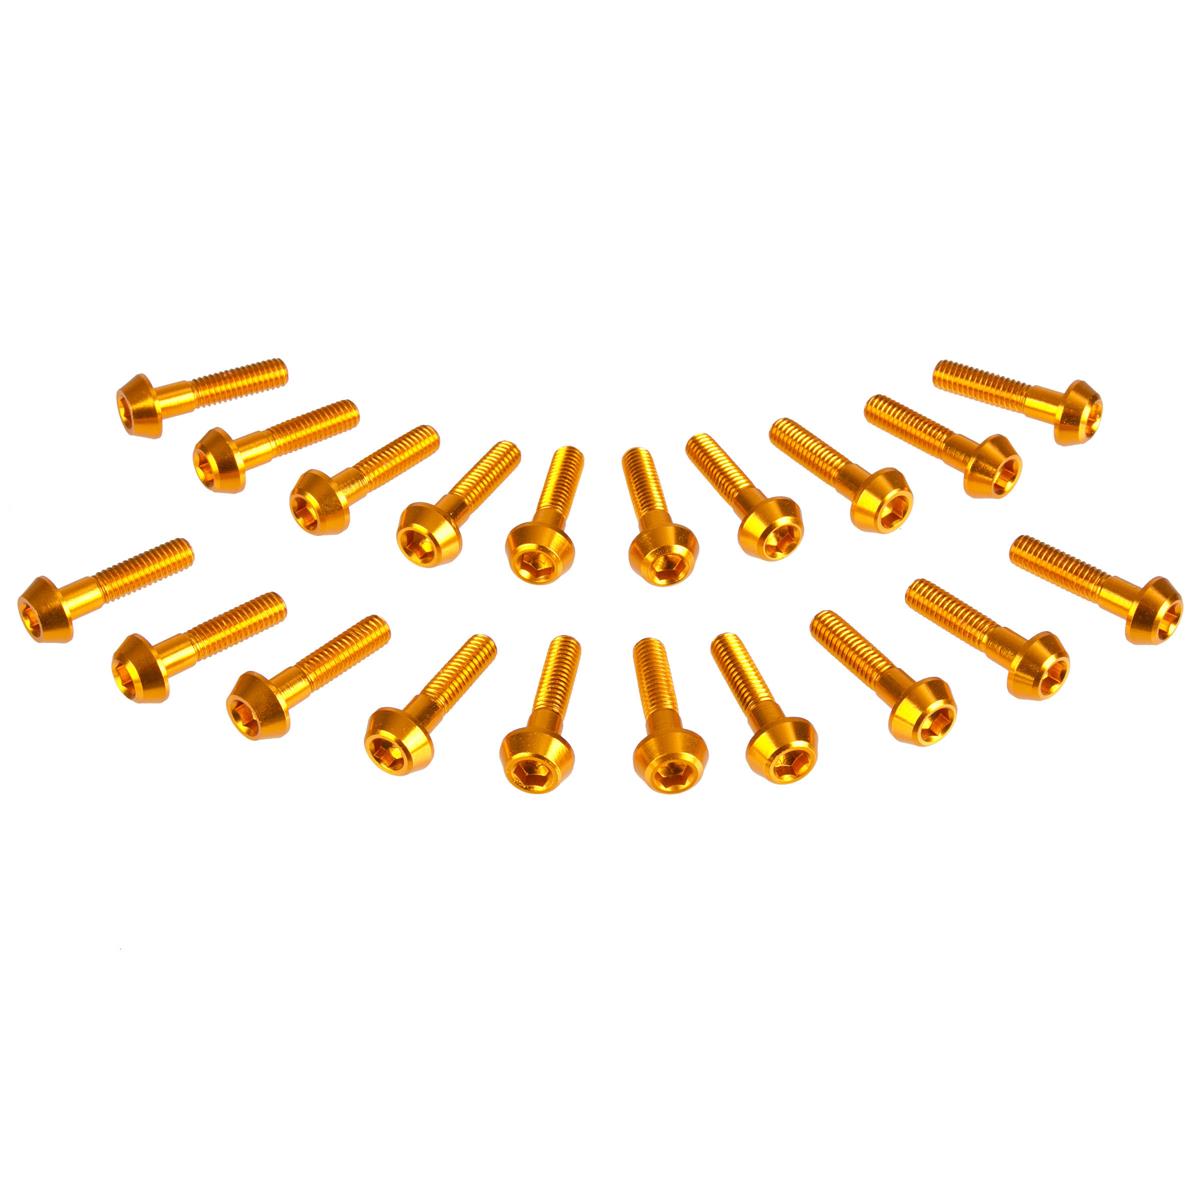 DRC Inner Hex Bolts  M6 x 25 mm, Gold, 20-Pack